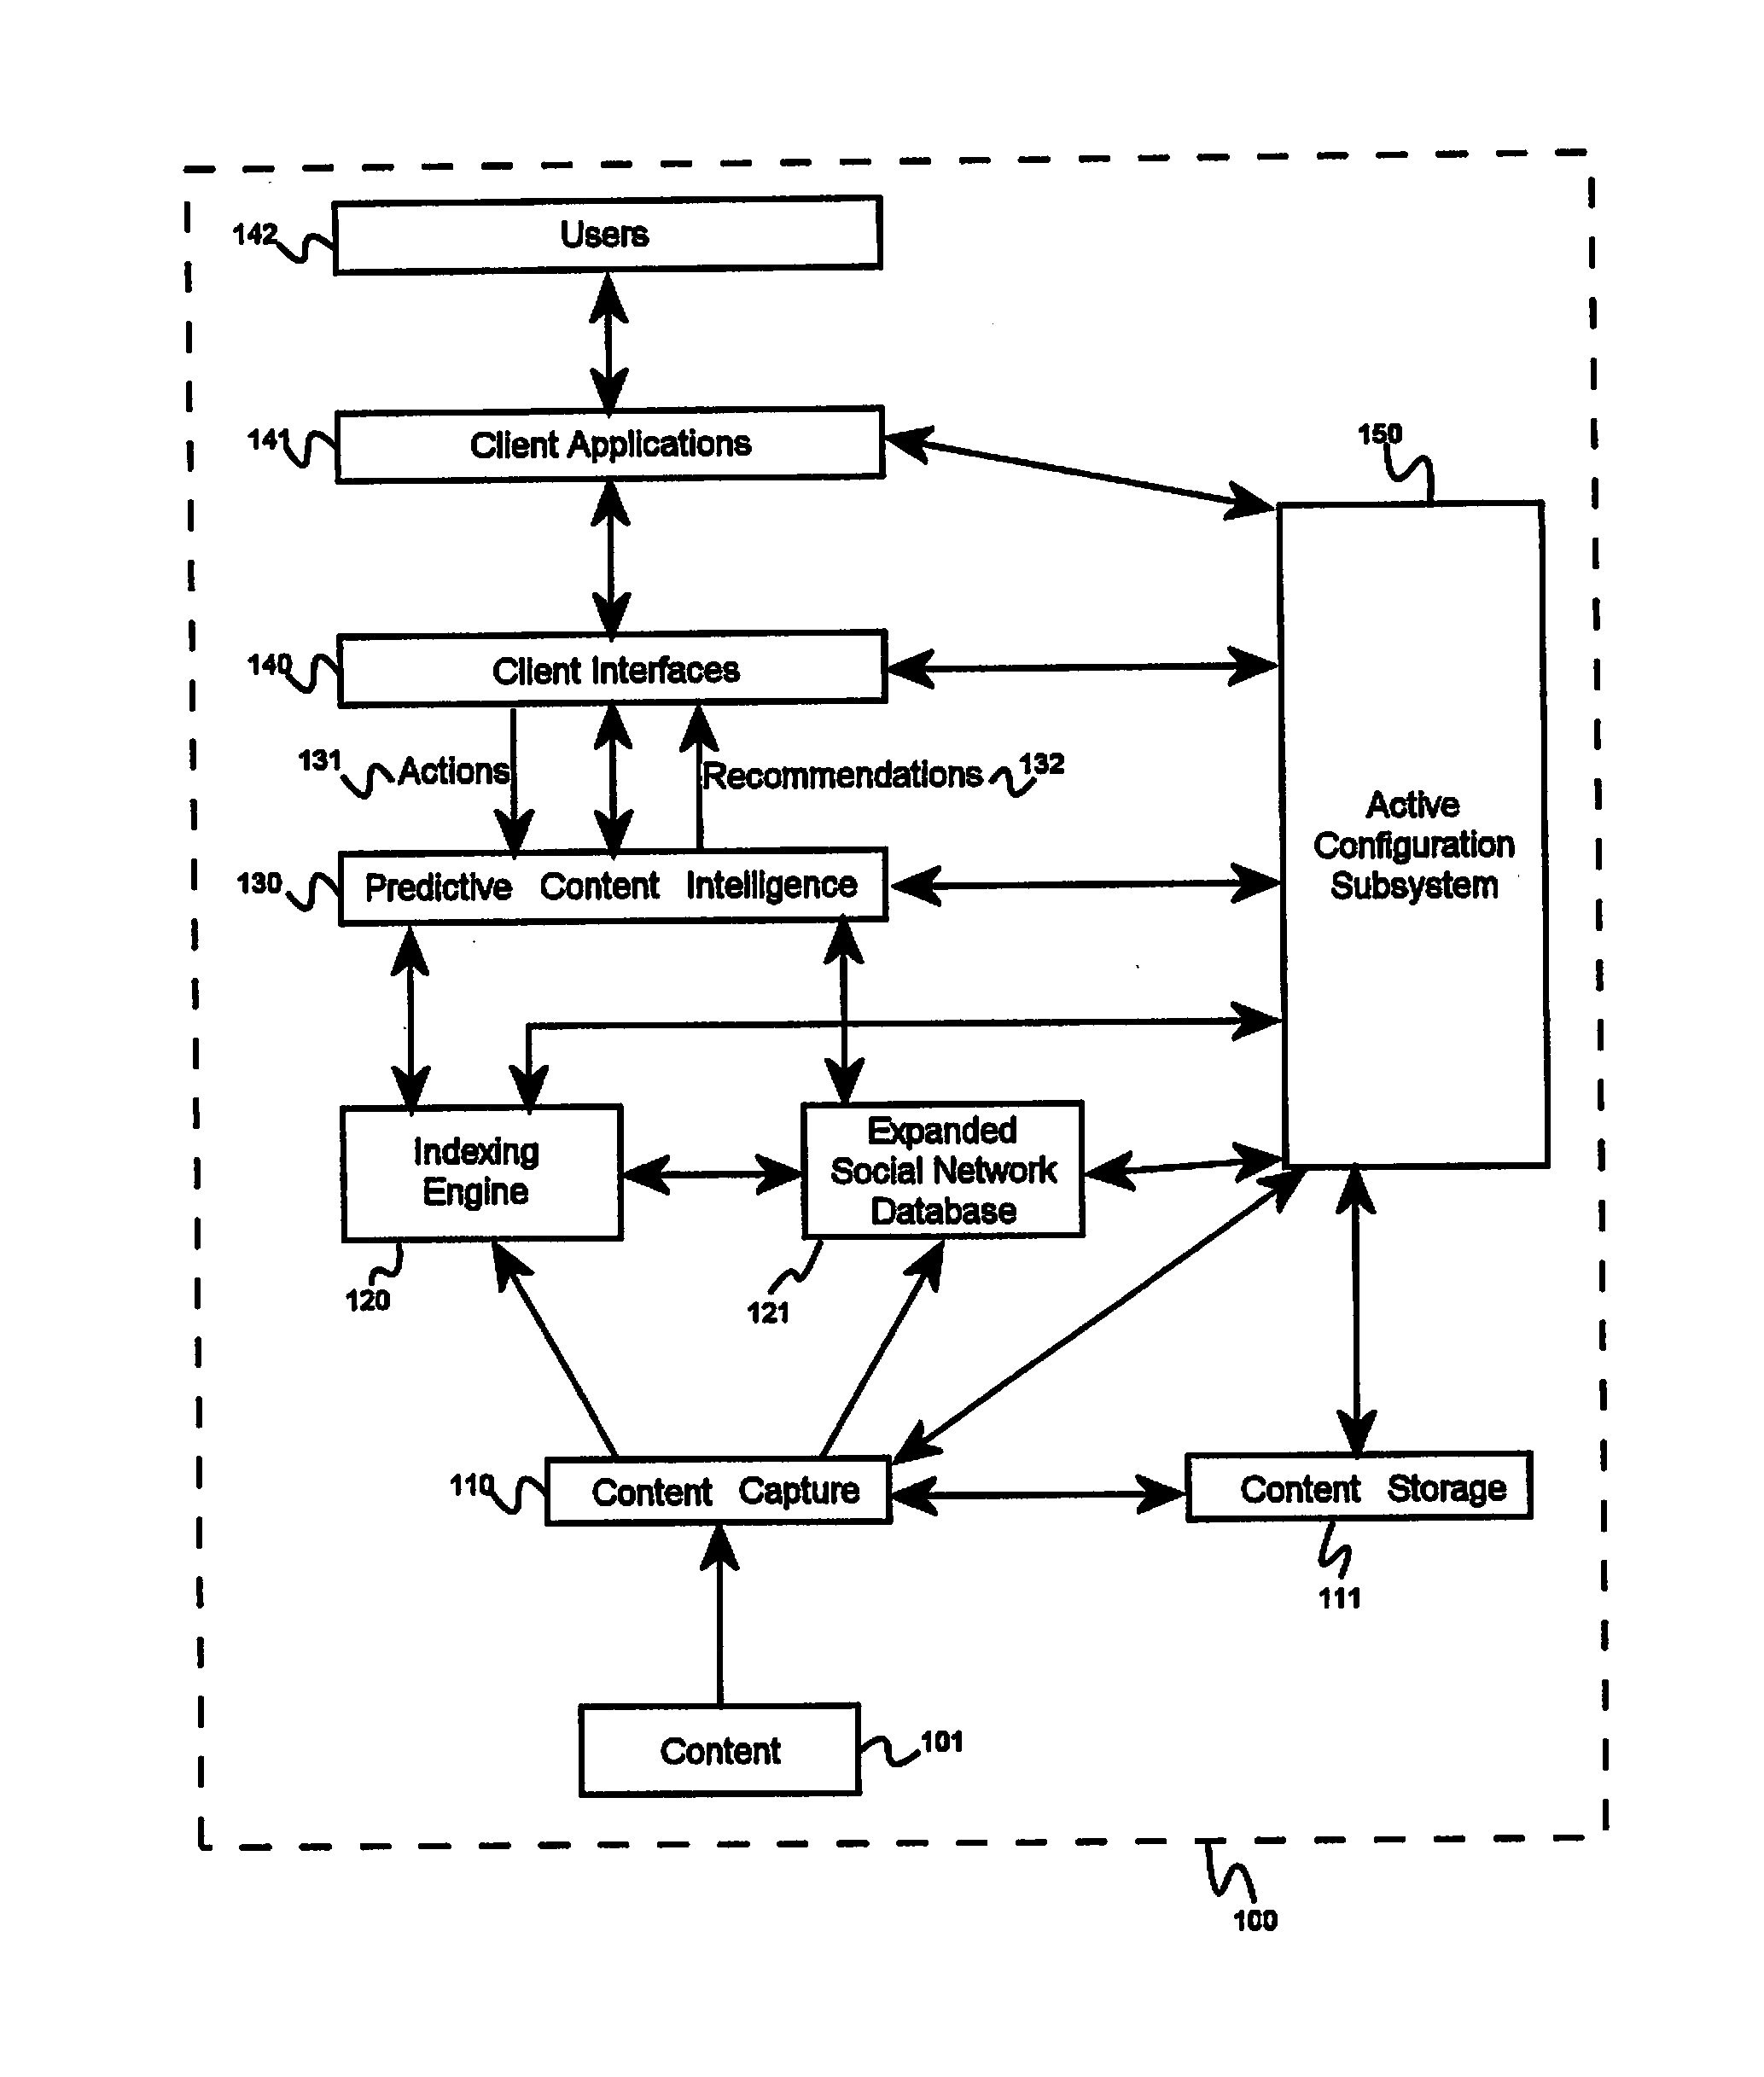 System and method for enabling contextual recommendations and collaboration within content